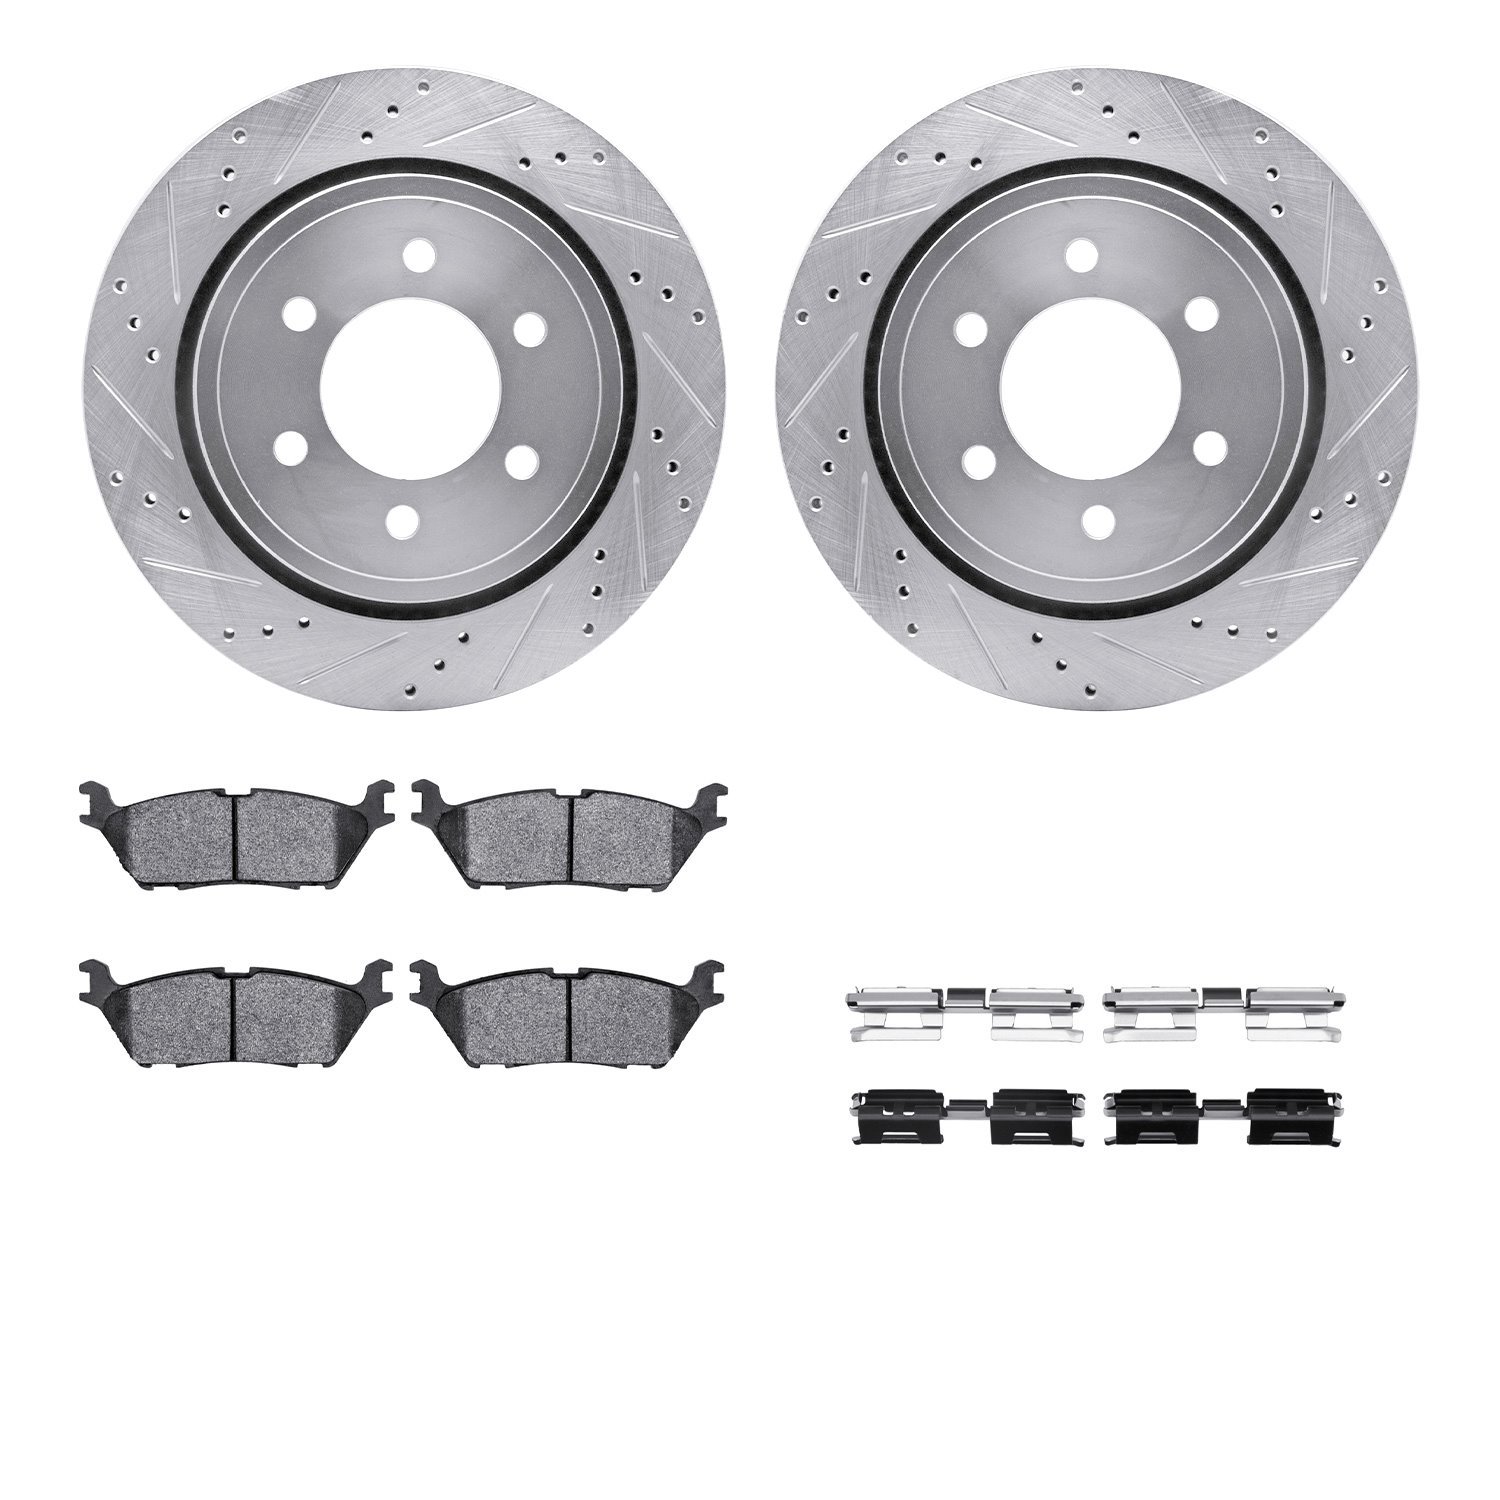 7212-99244 Drilled/Slotted Rotors w/Heavy-Duty Brake Pads Kit & Hardware [Silver], 2015-2017 Ford/Lincoln/Mercury/Mazda, Positio